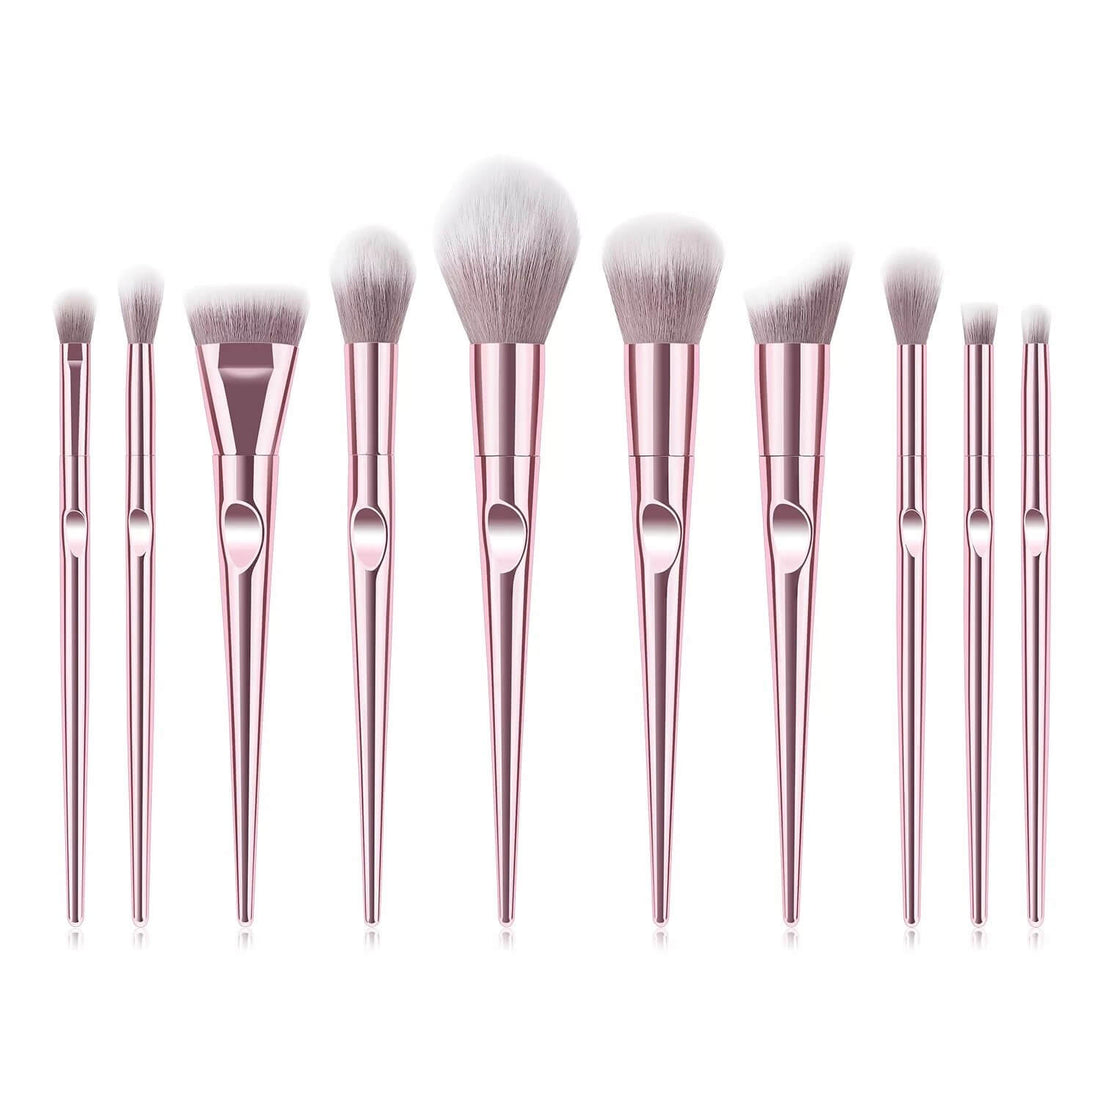 10 pc. Pink Makeup Brushes standing, thick fluffy bristles, chrome handles